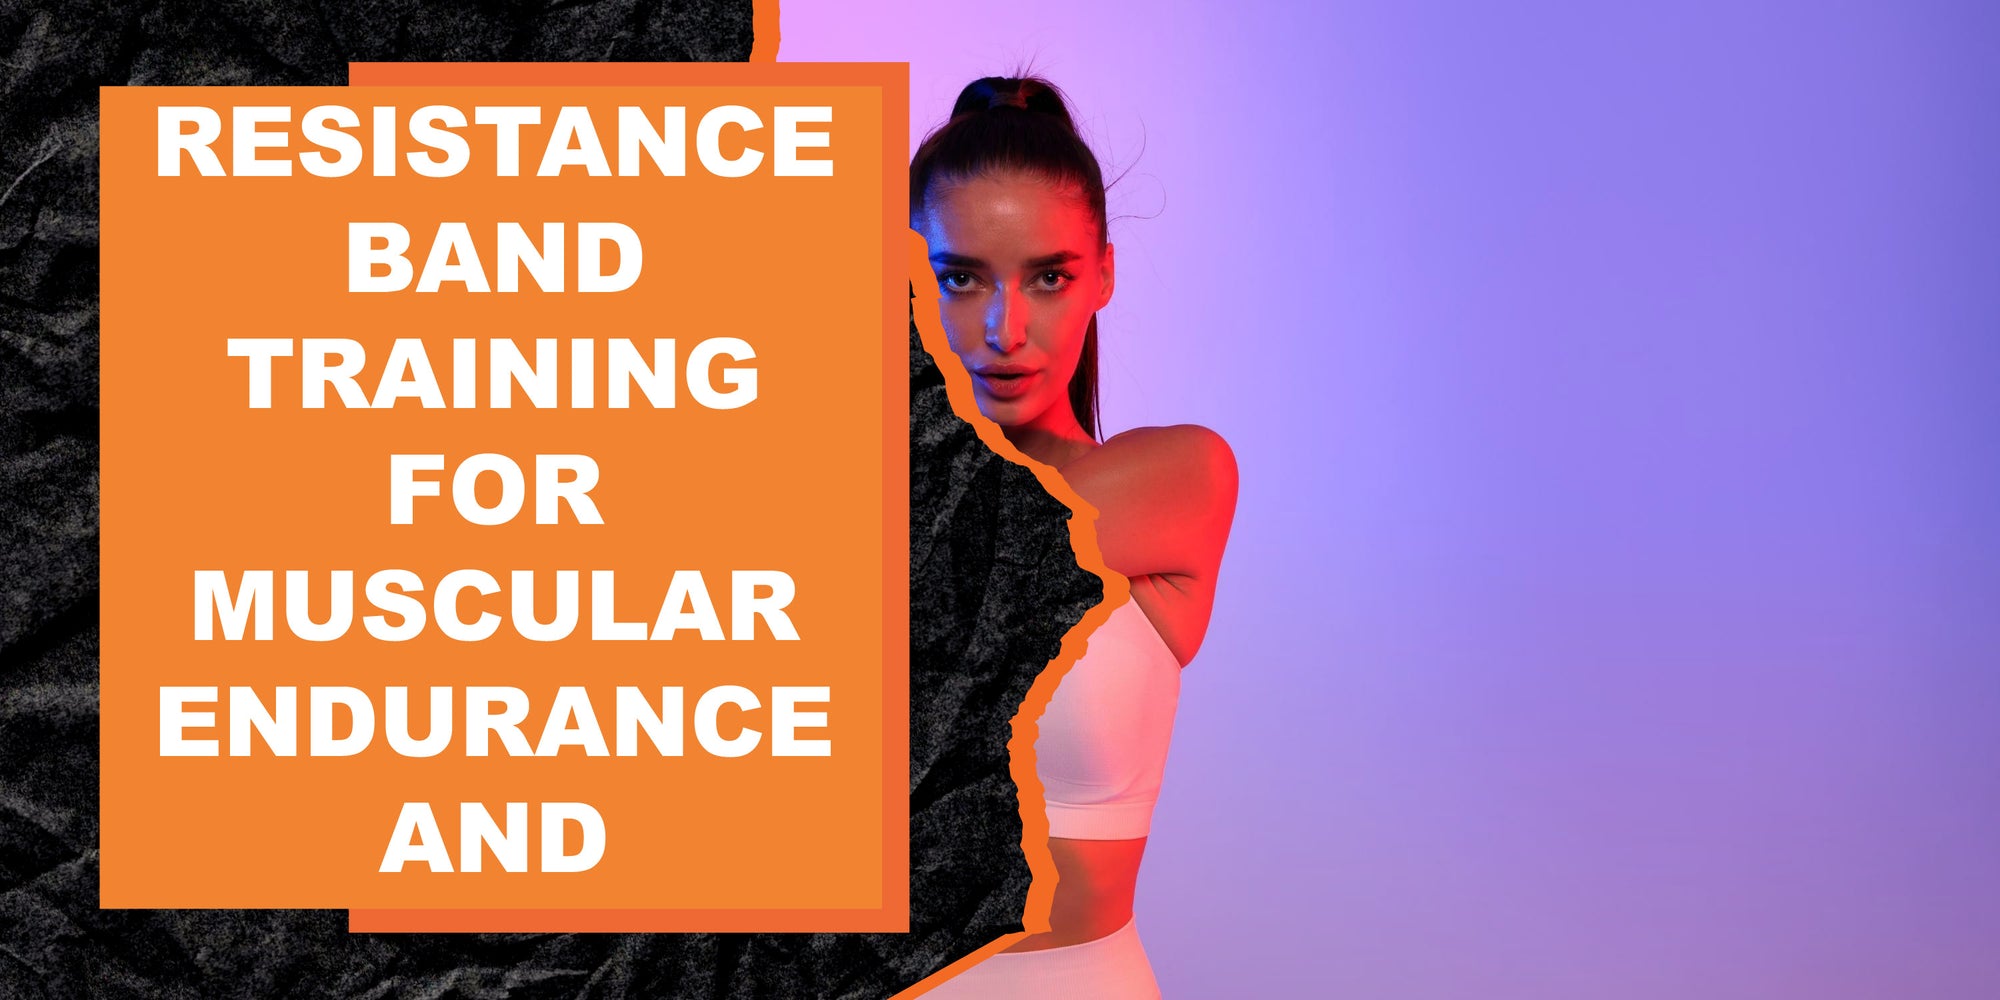 Resistance Band Training for Muscular Endurance and Strength